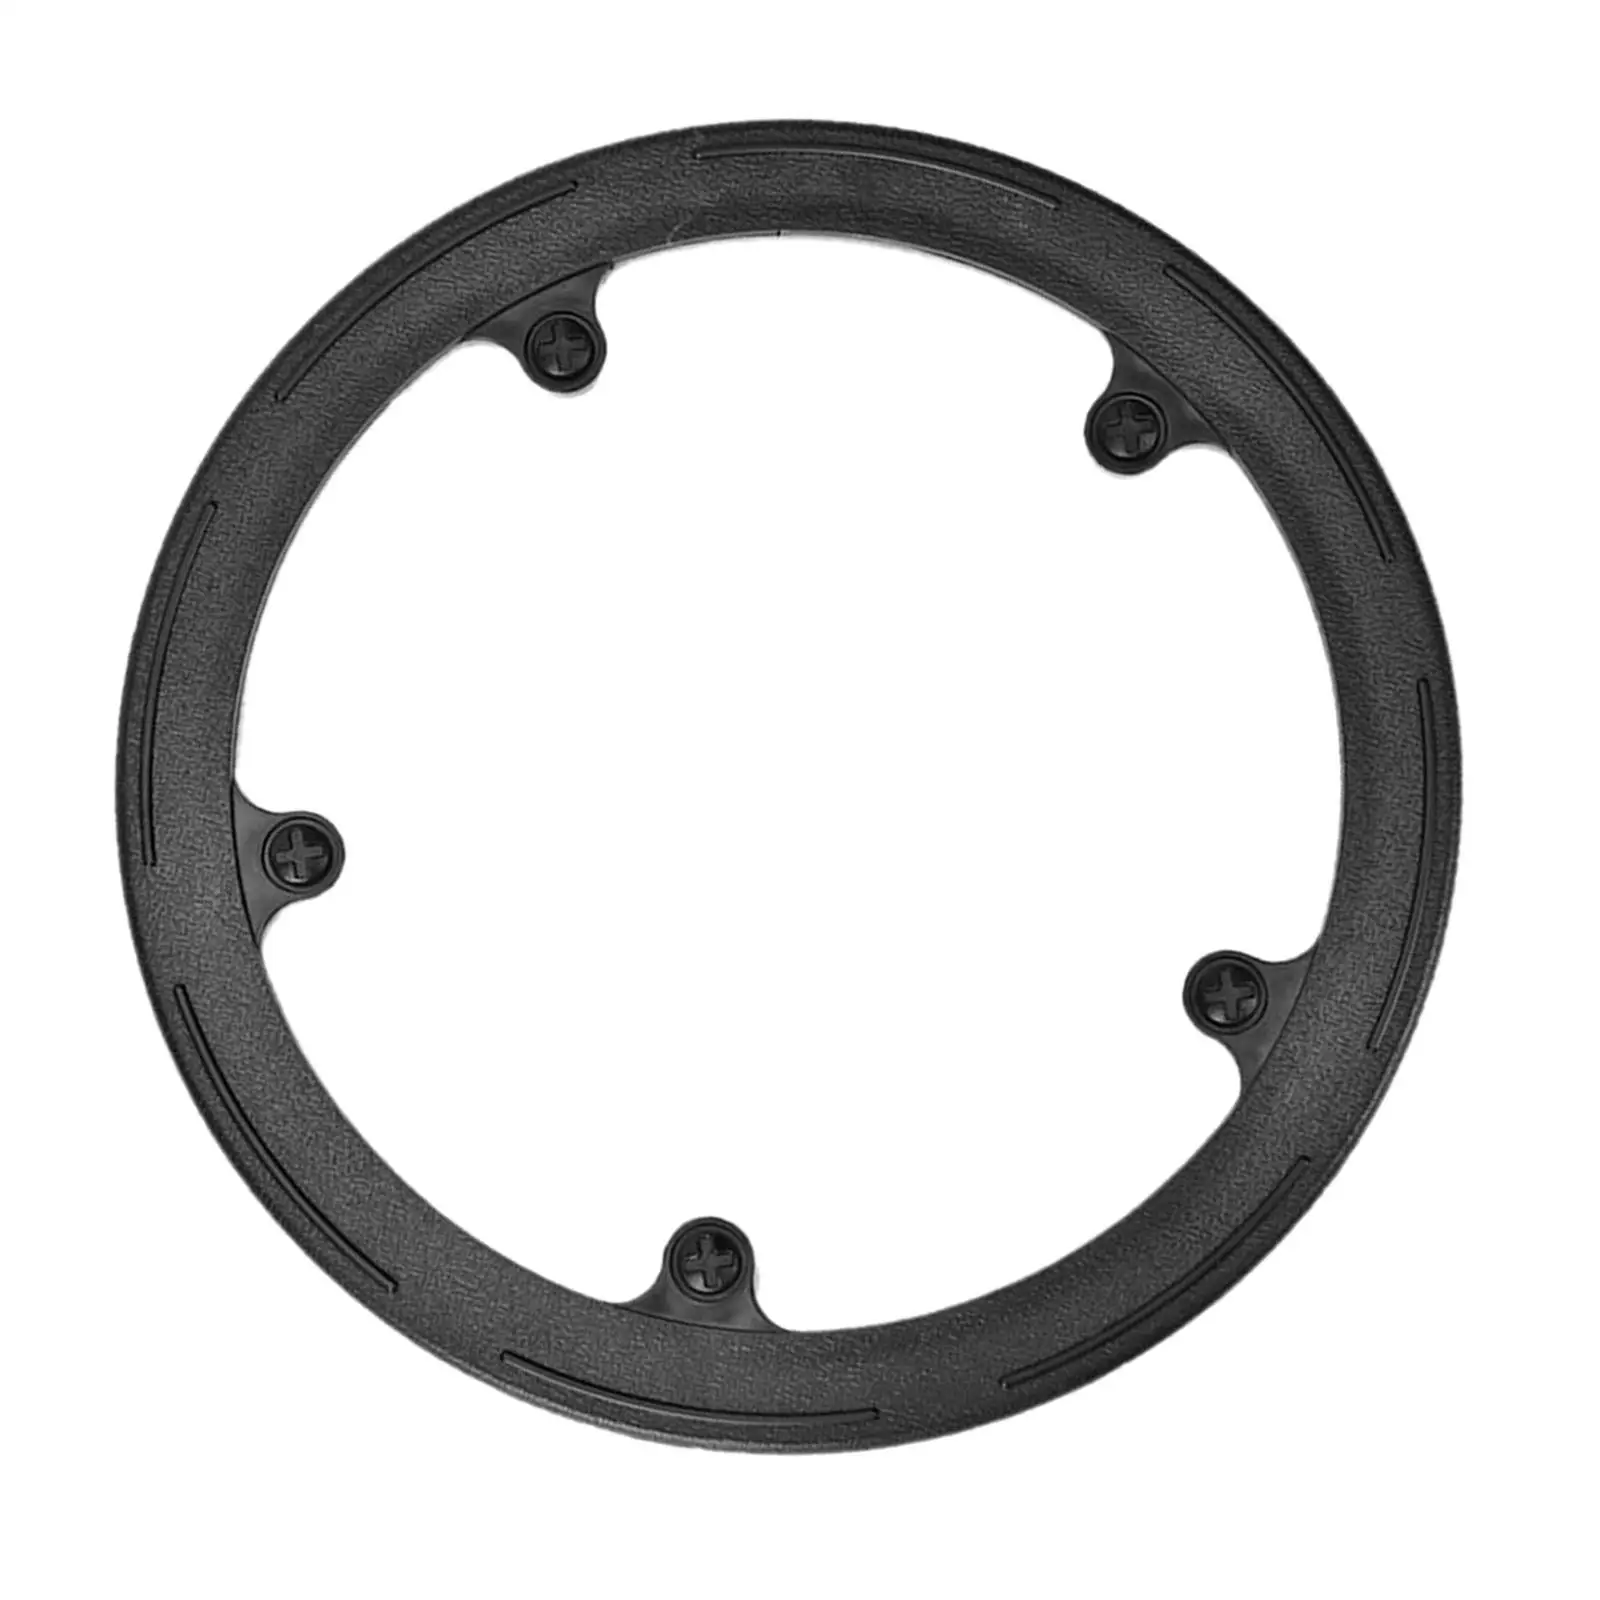 Bike Chain Wheel Protector Chainring for Repair Parts